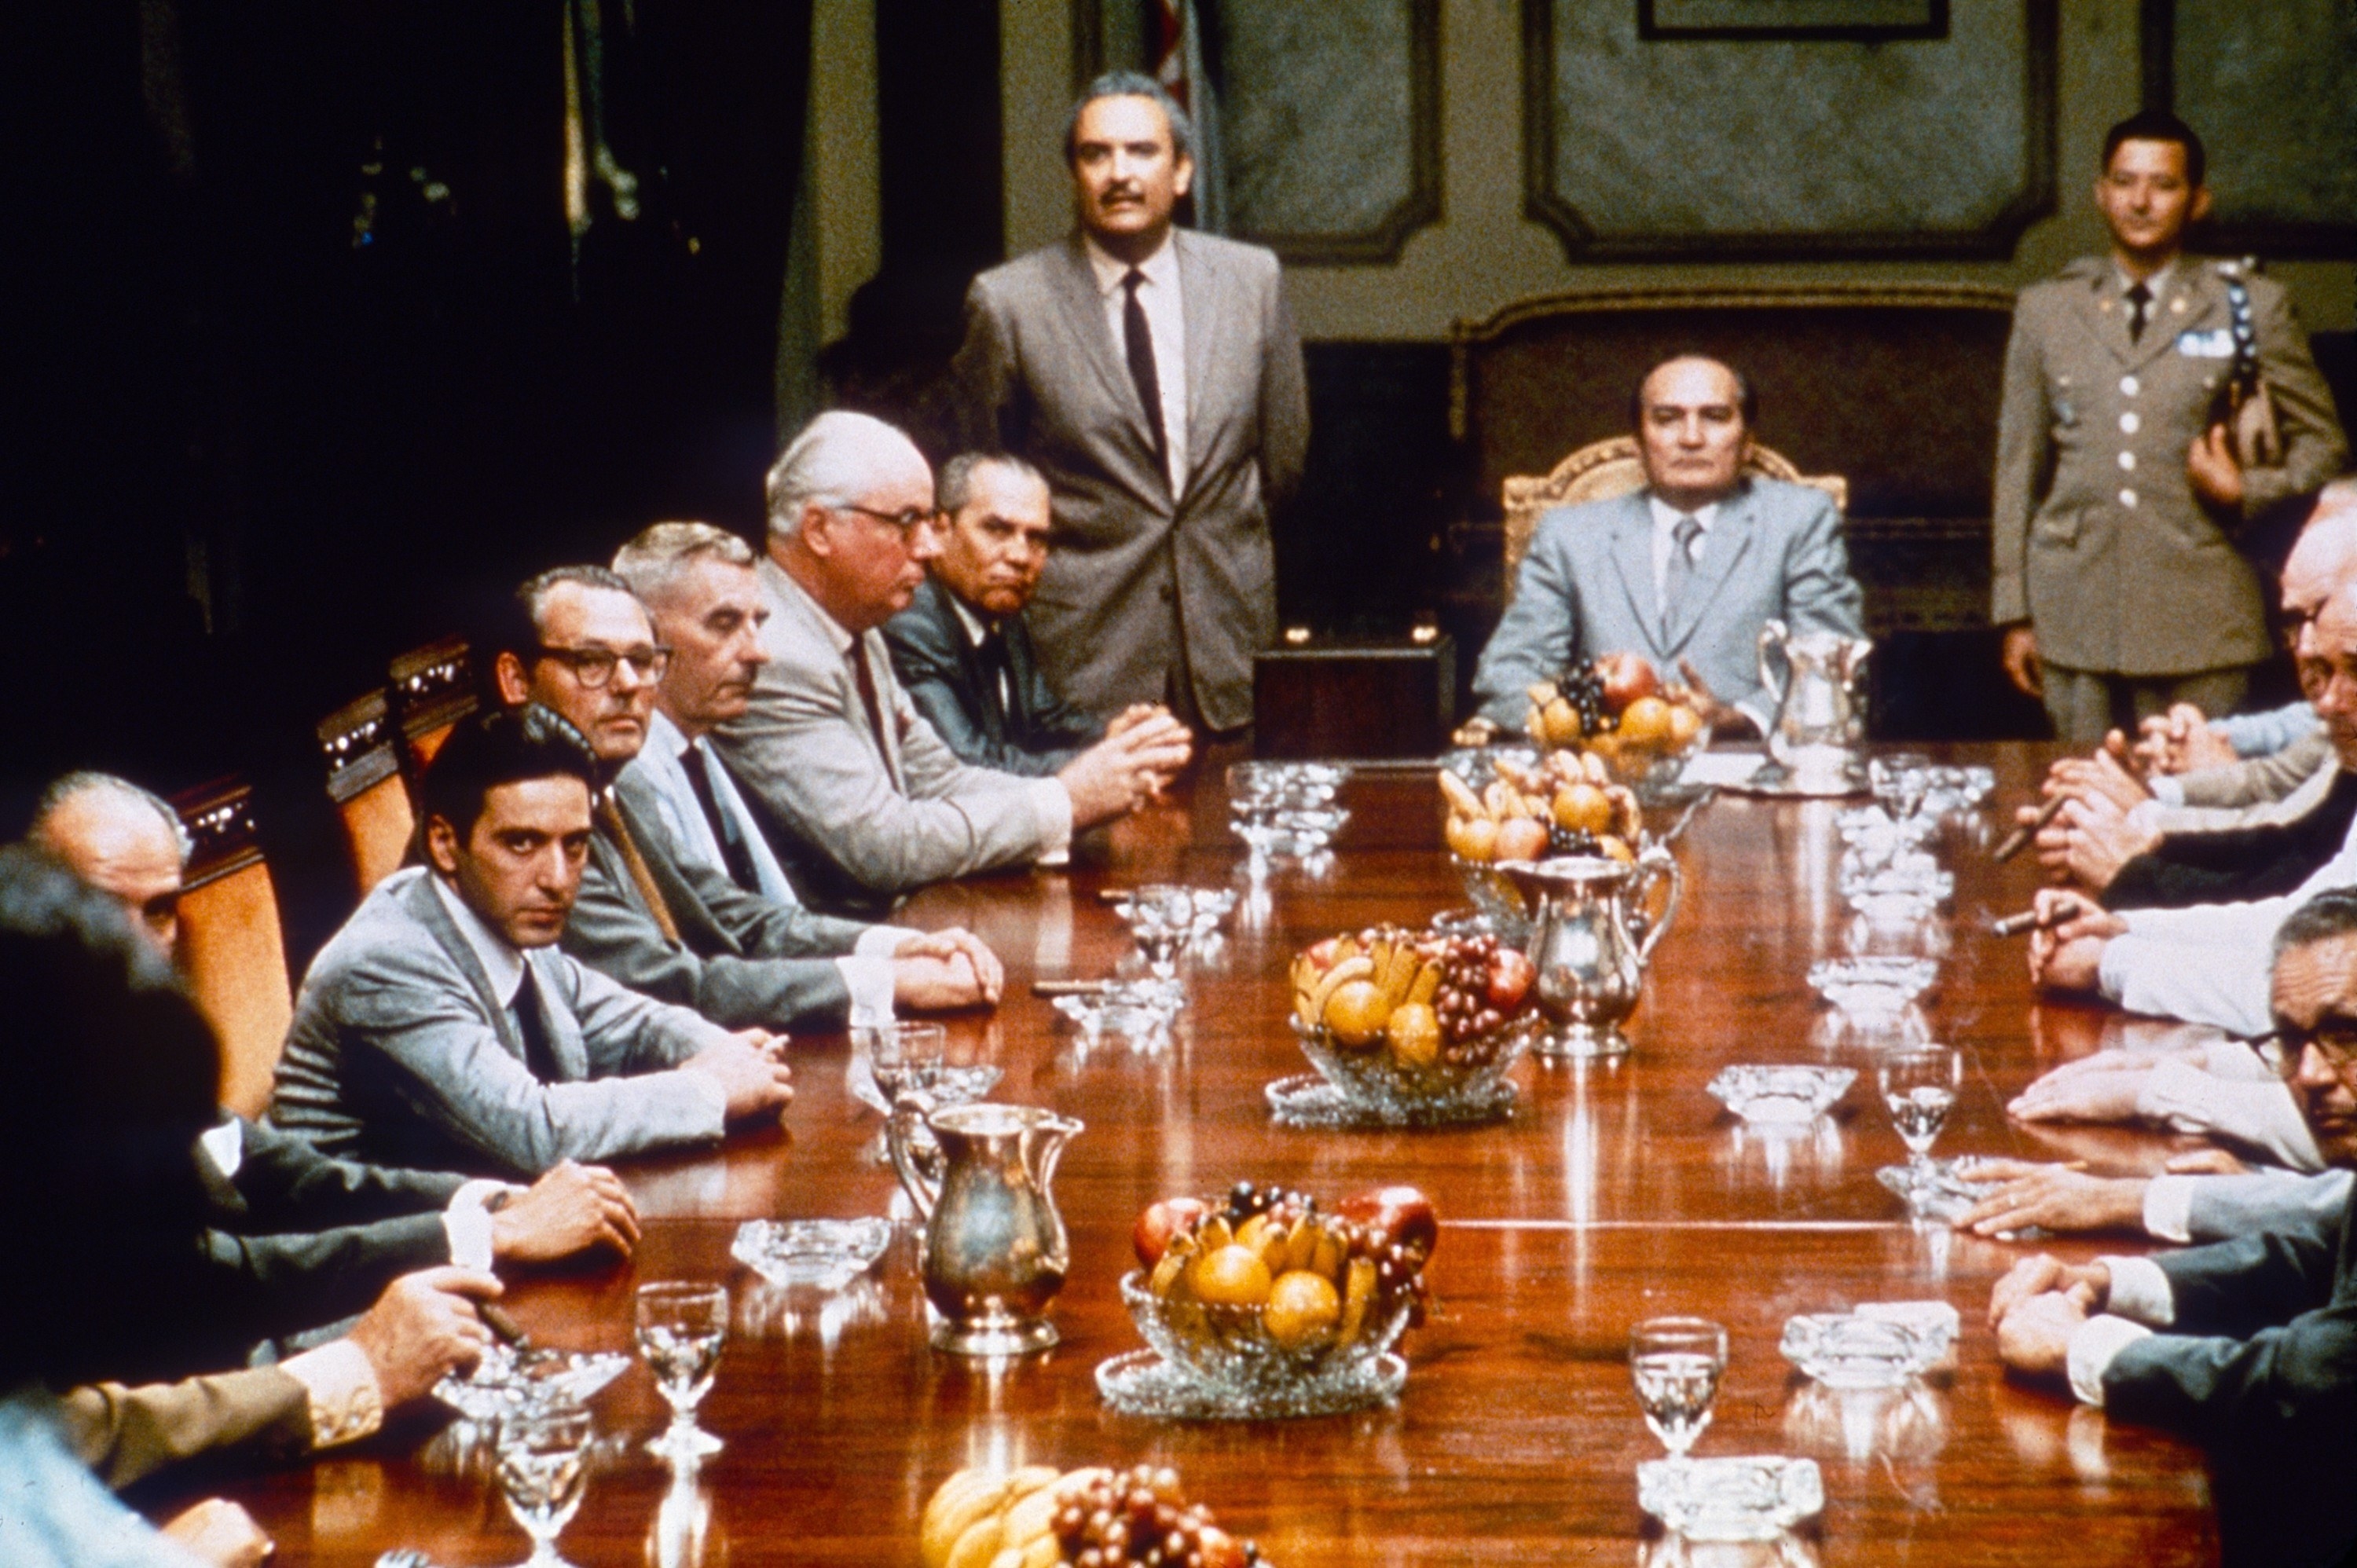 Many men in suits sitting around a large table with plates of food and glasses